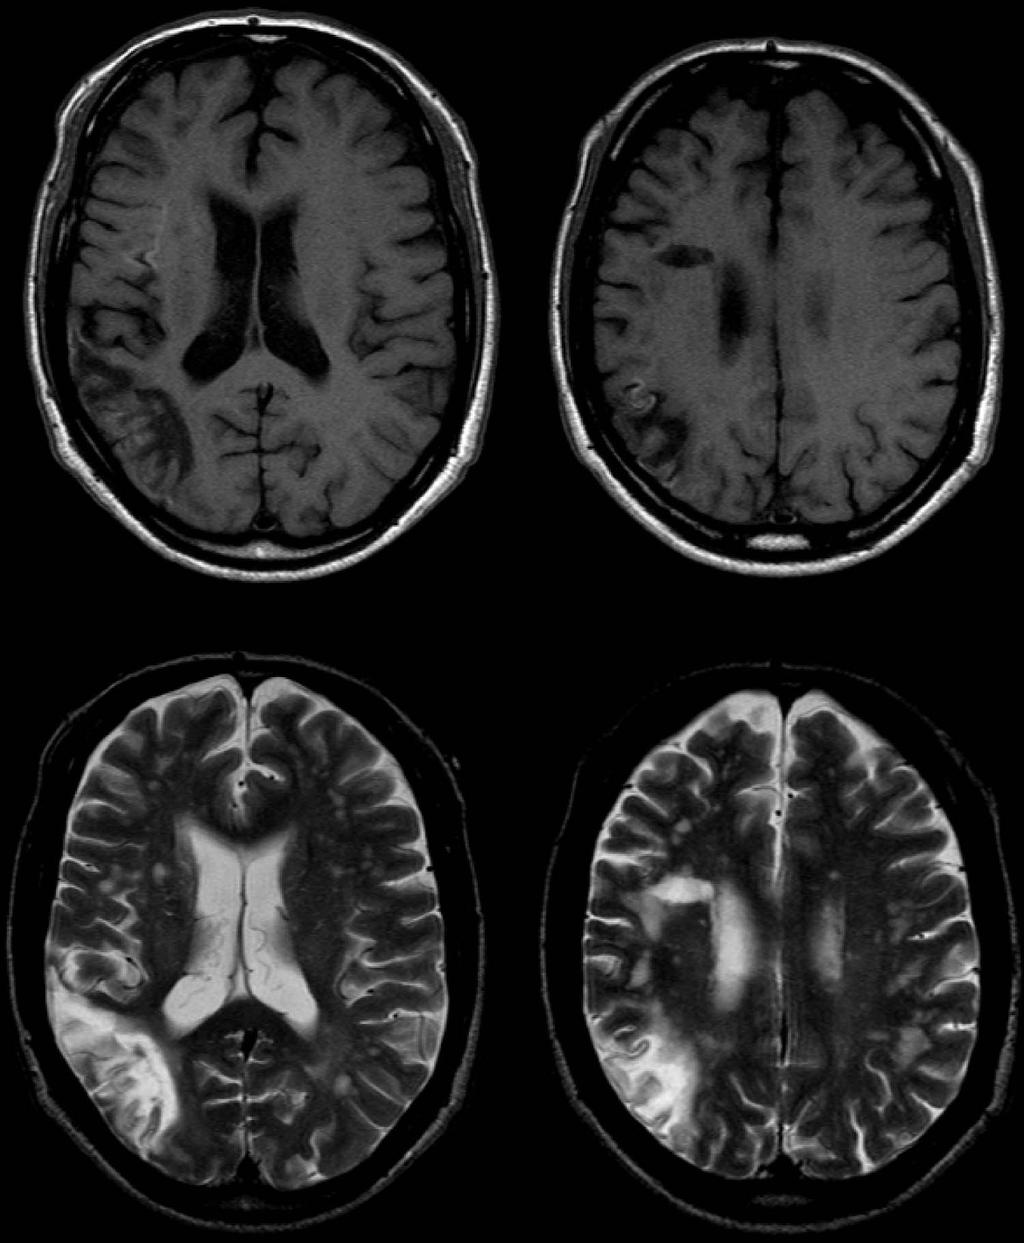 412 SATOH ET AL. Figure 1. Axial MRI images obtained 7 months after cerebral infarction. Upper and lower images show T1- and T2-weighted images, respectively.